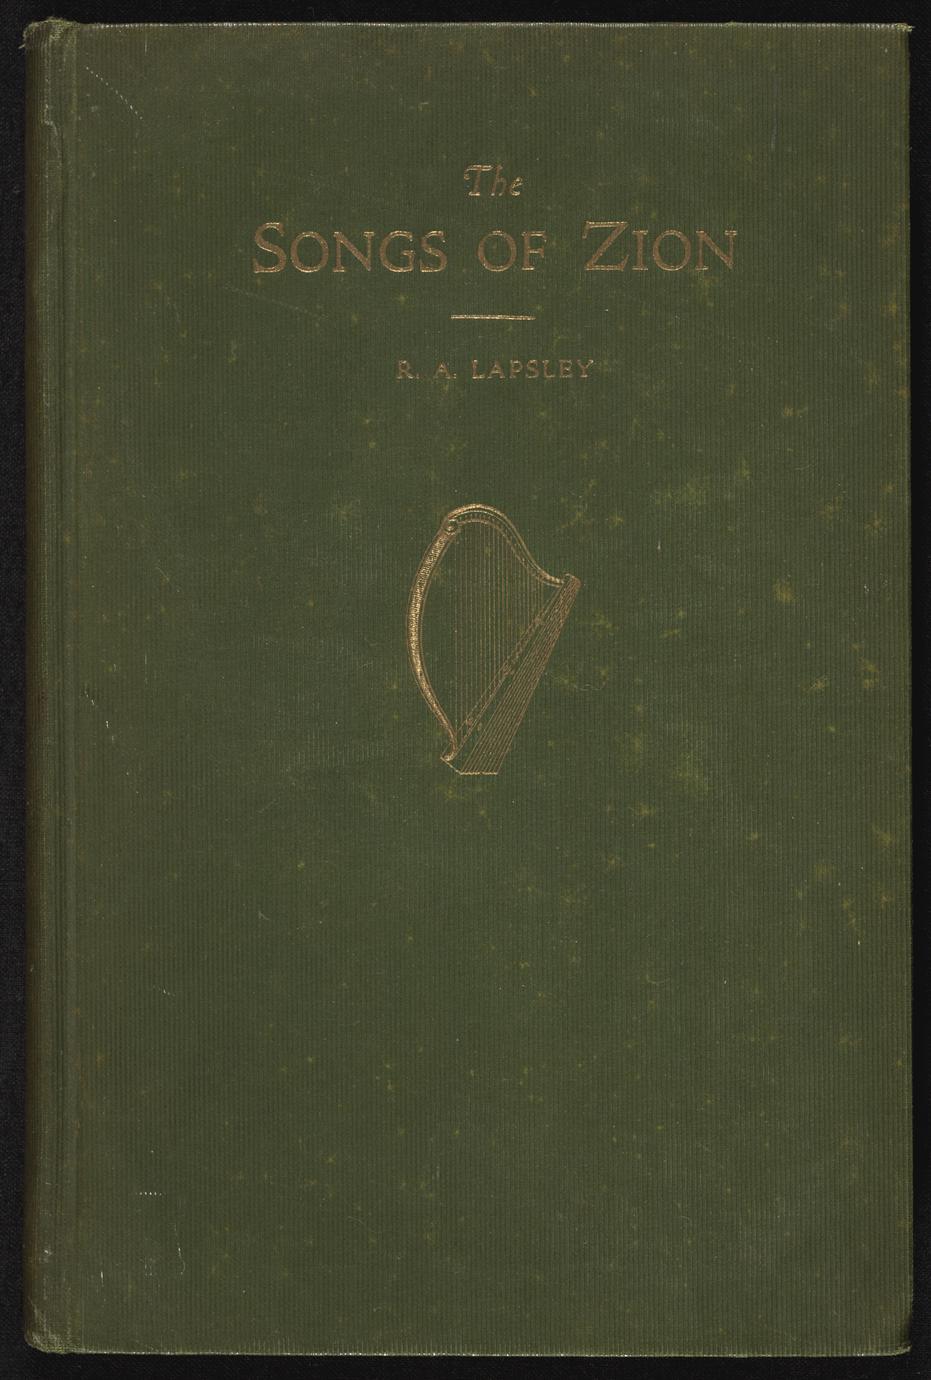 The songs of Zion : a brief study of our hymns : their history, excellence, authorship, and place in the affection and experiences of the people of God (1 of 2)